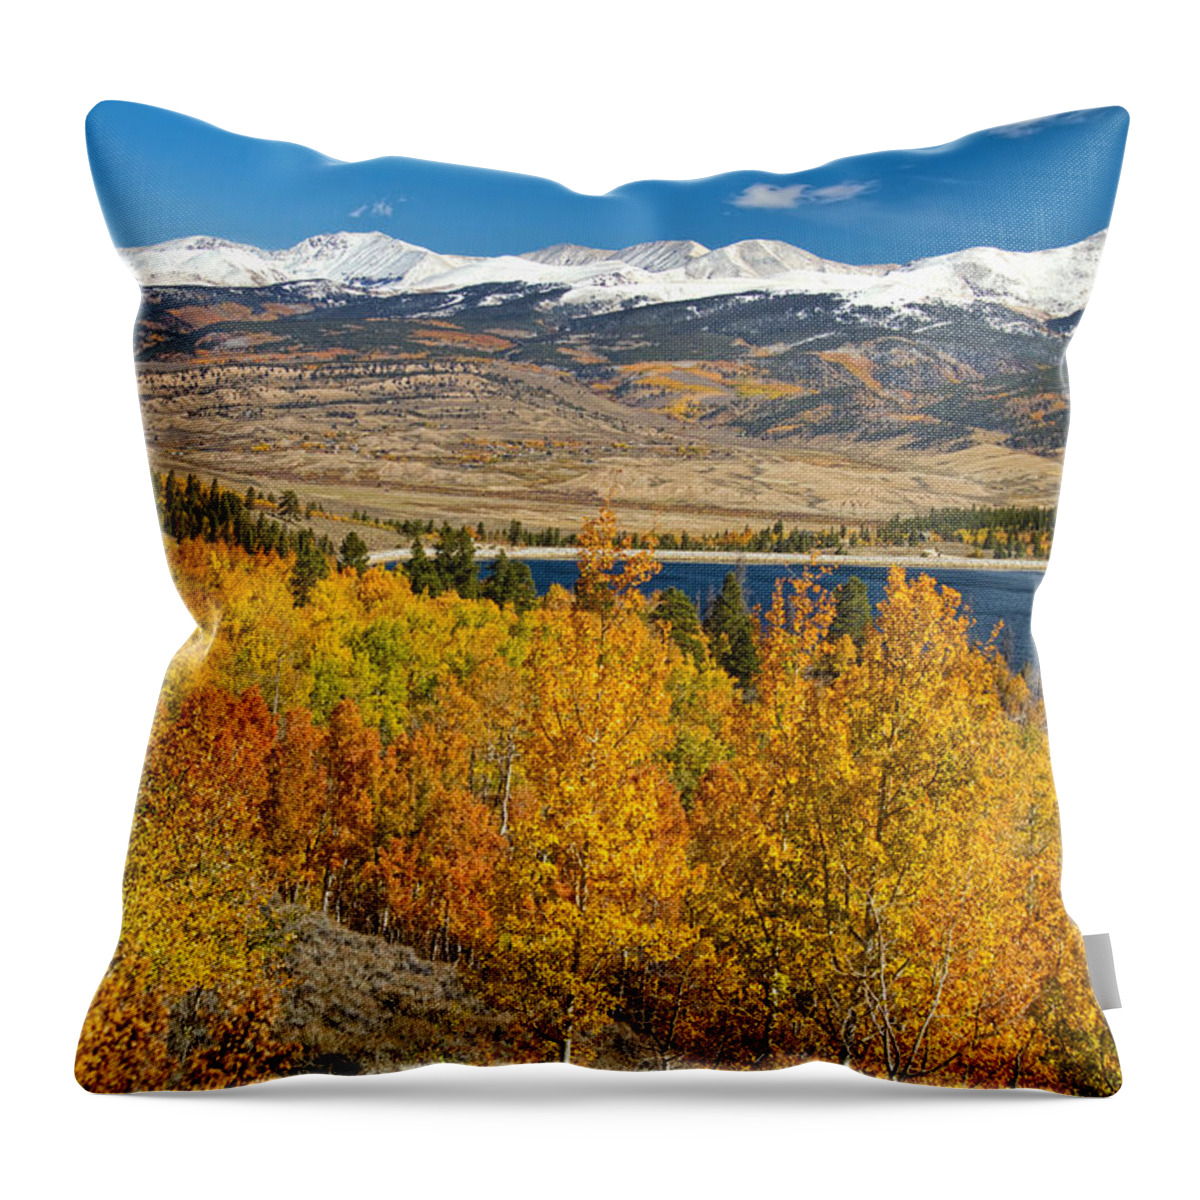 Autumn Throw Pillow featuring the photograph Twin Lakes Colorado Autumn Landscape by James BO Insogna